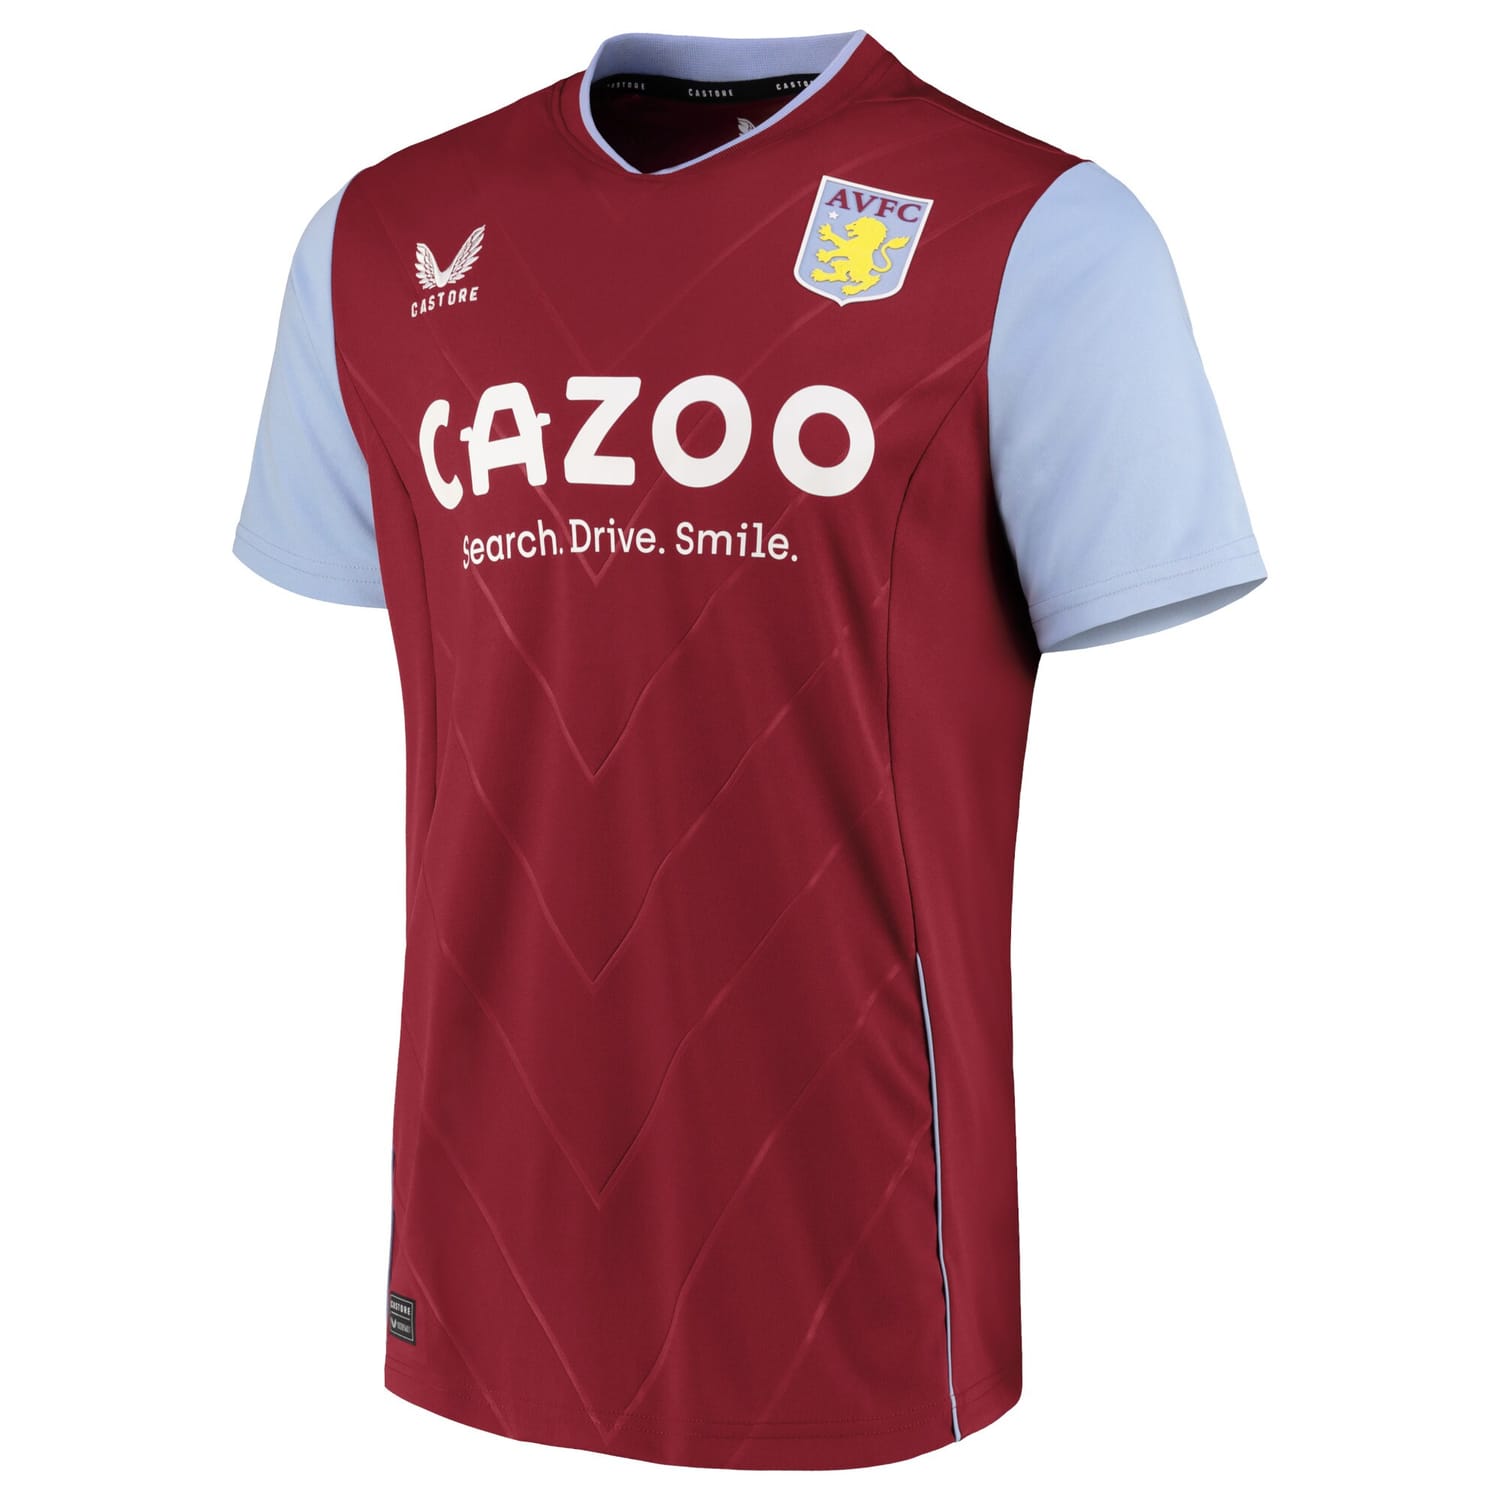 Premier League Ast. Villa Home Jersey Shirt 2022-23 player Ashley Young 18 printing for Men